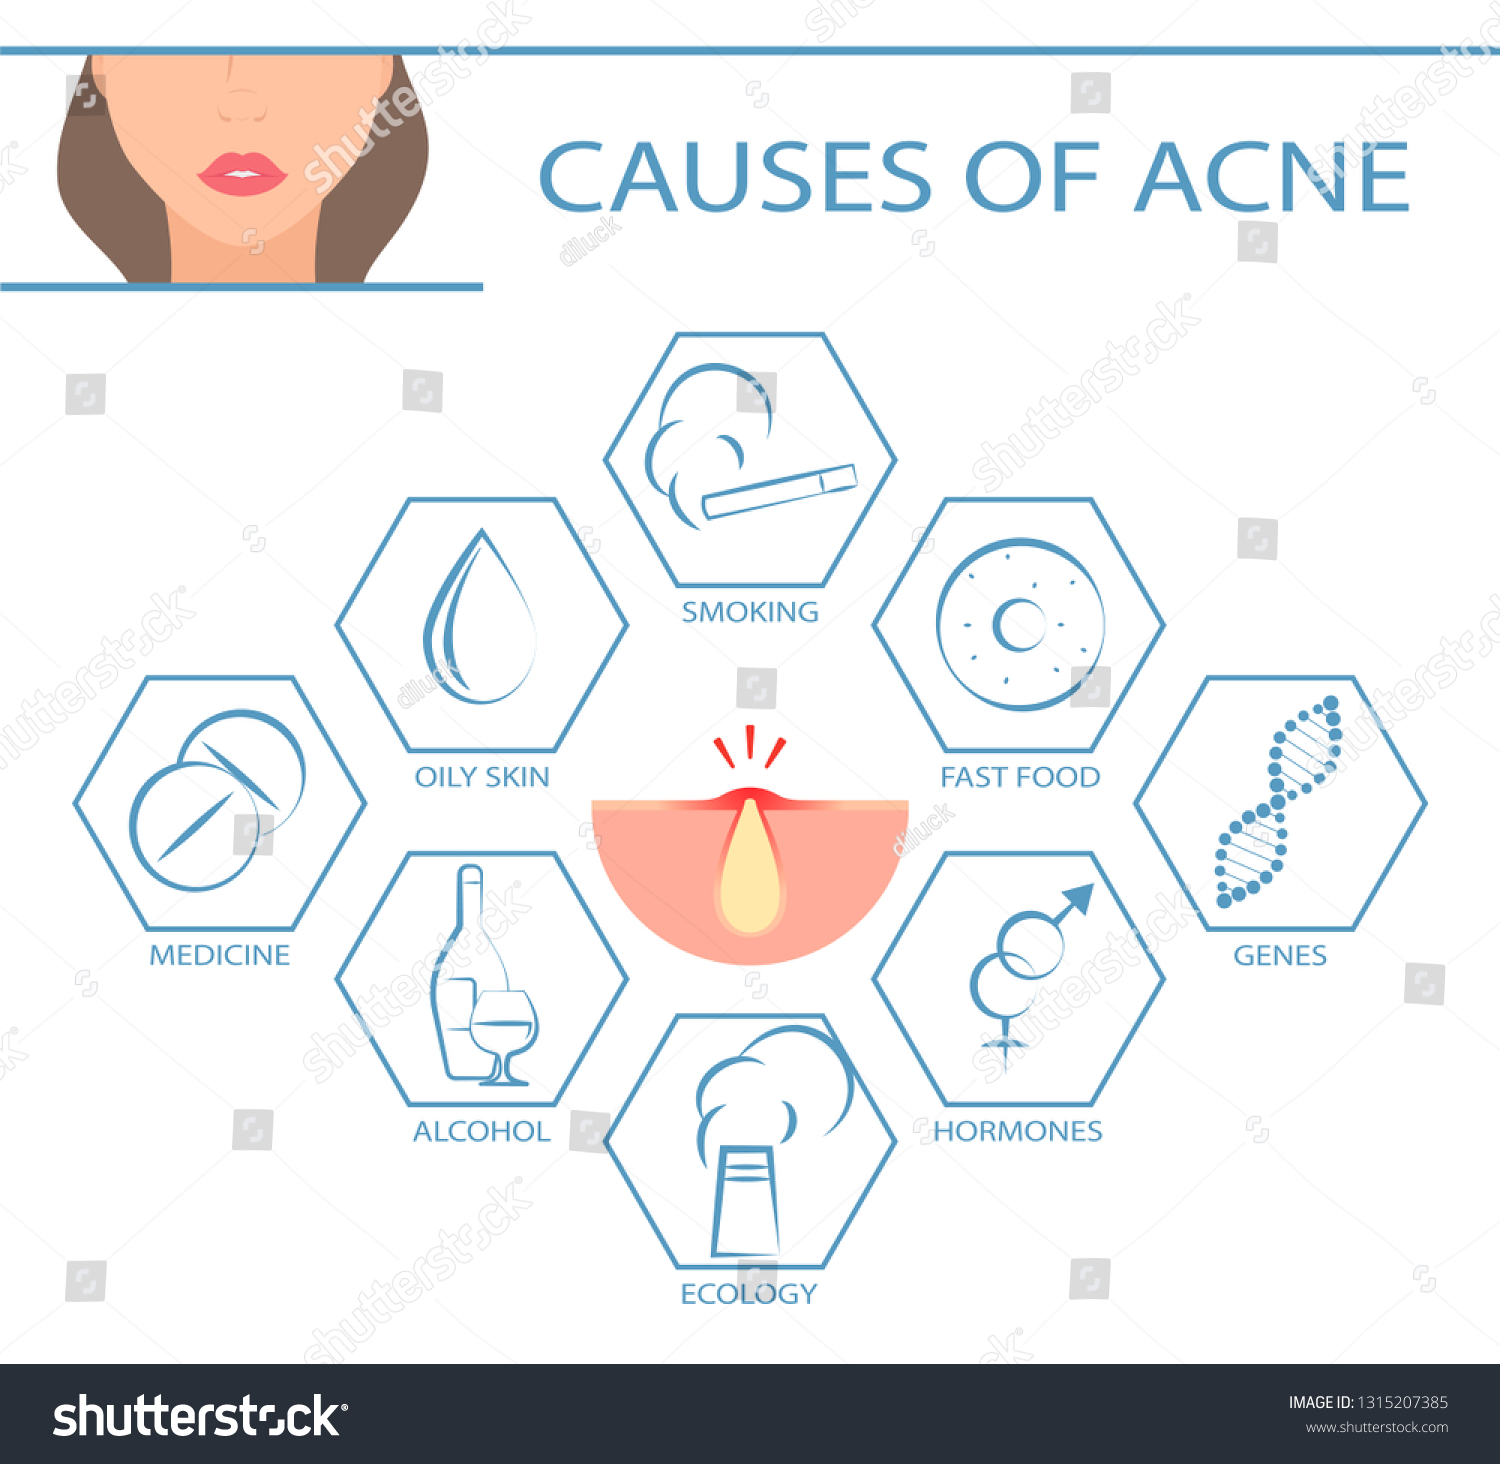 Causes Acne Infographic Dermatology Skin Problems Stock Vector